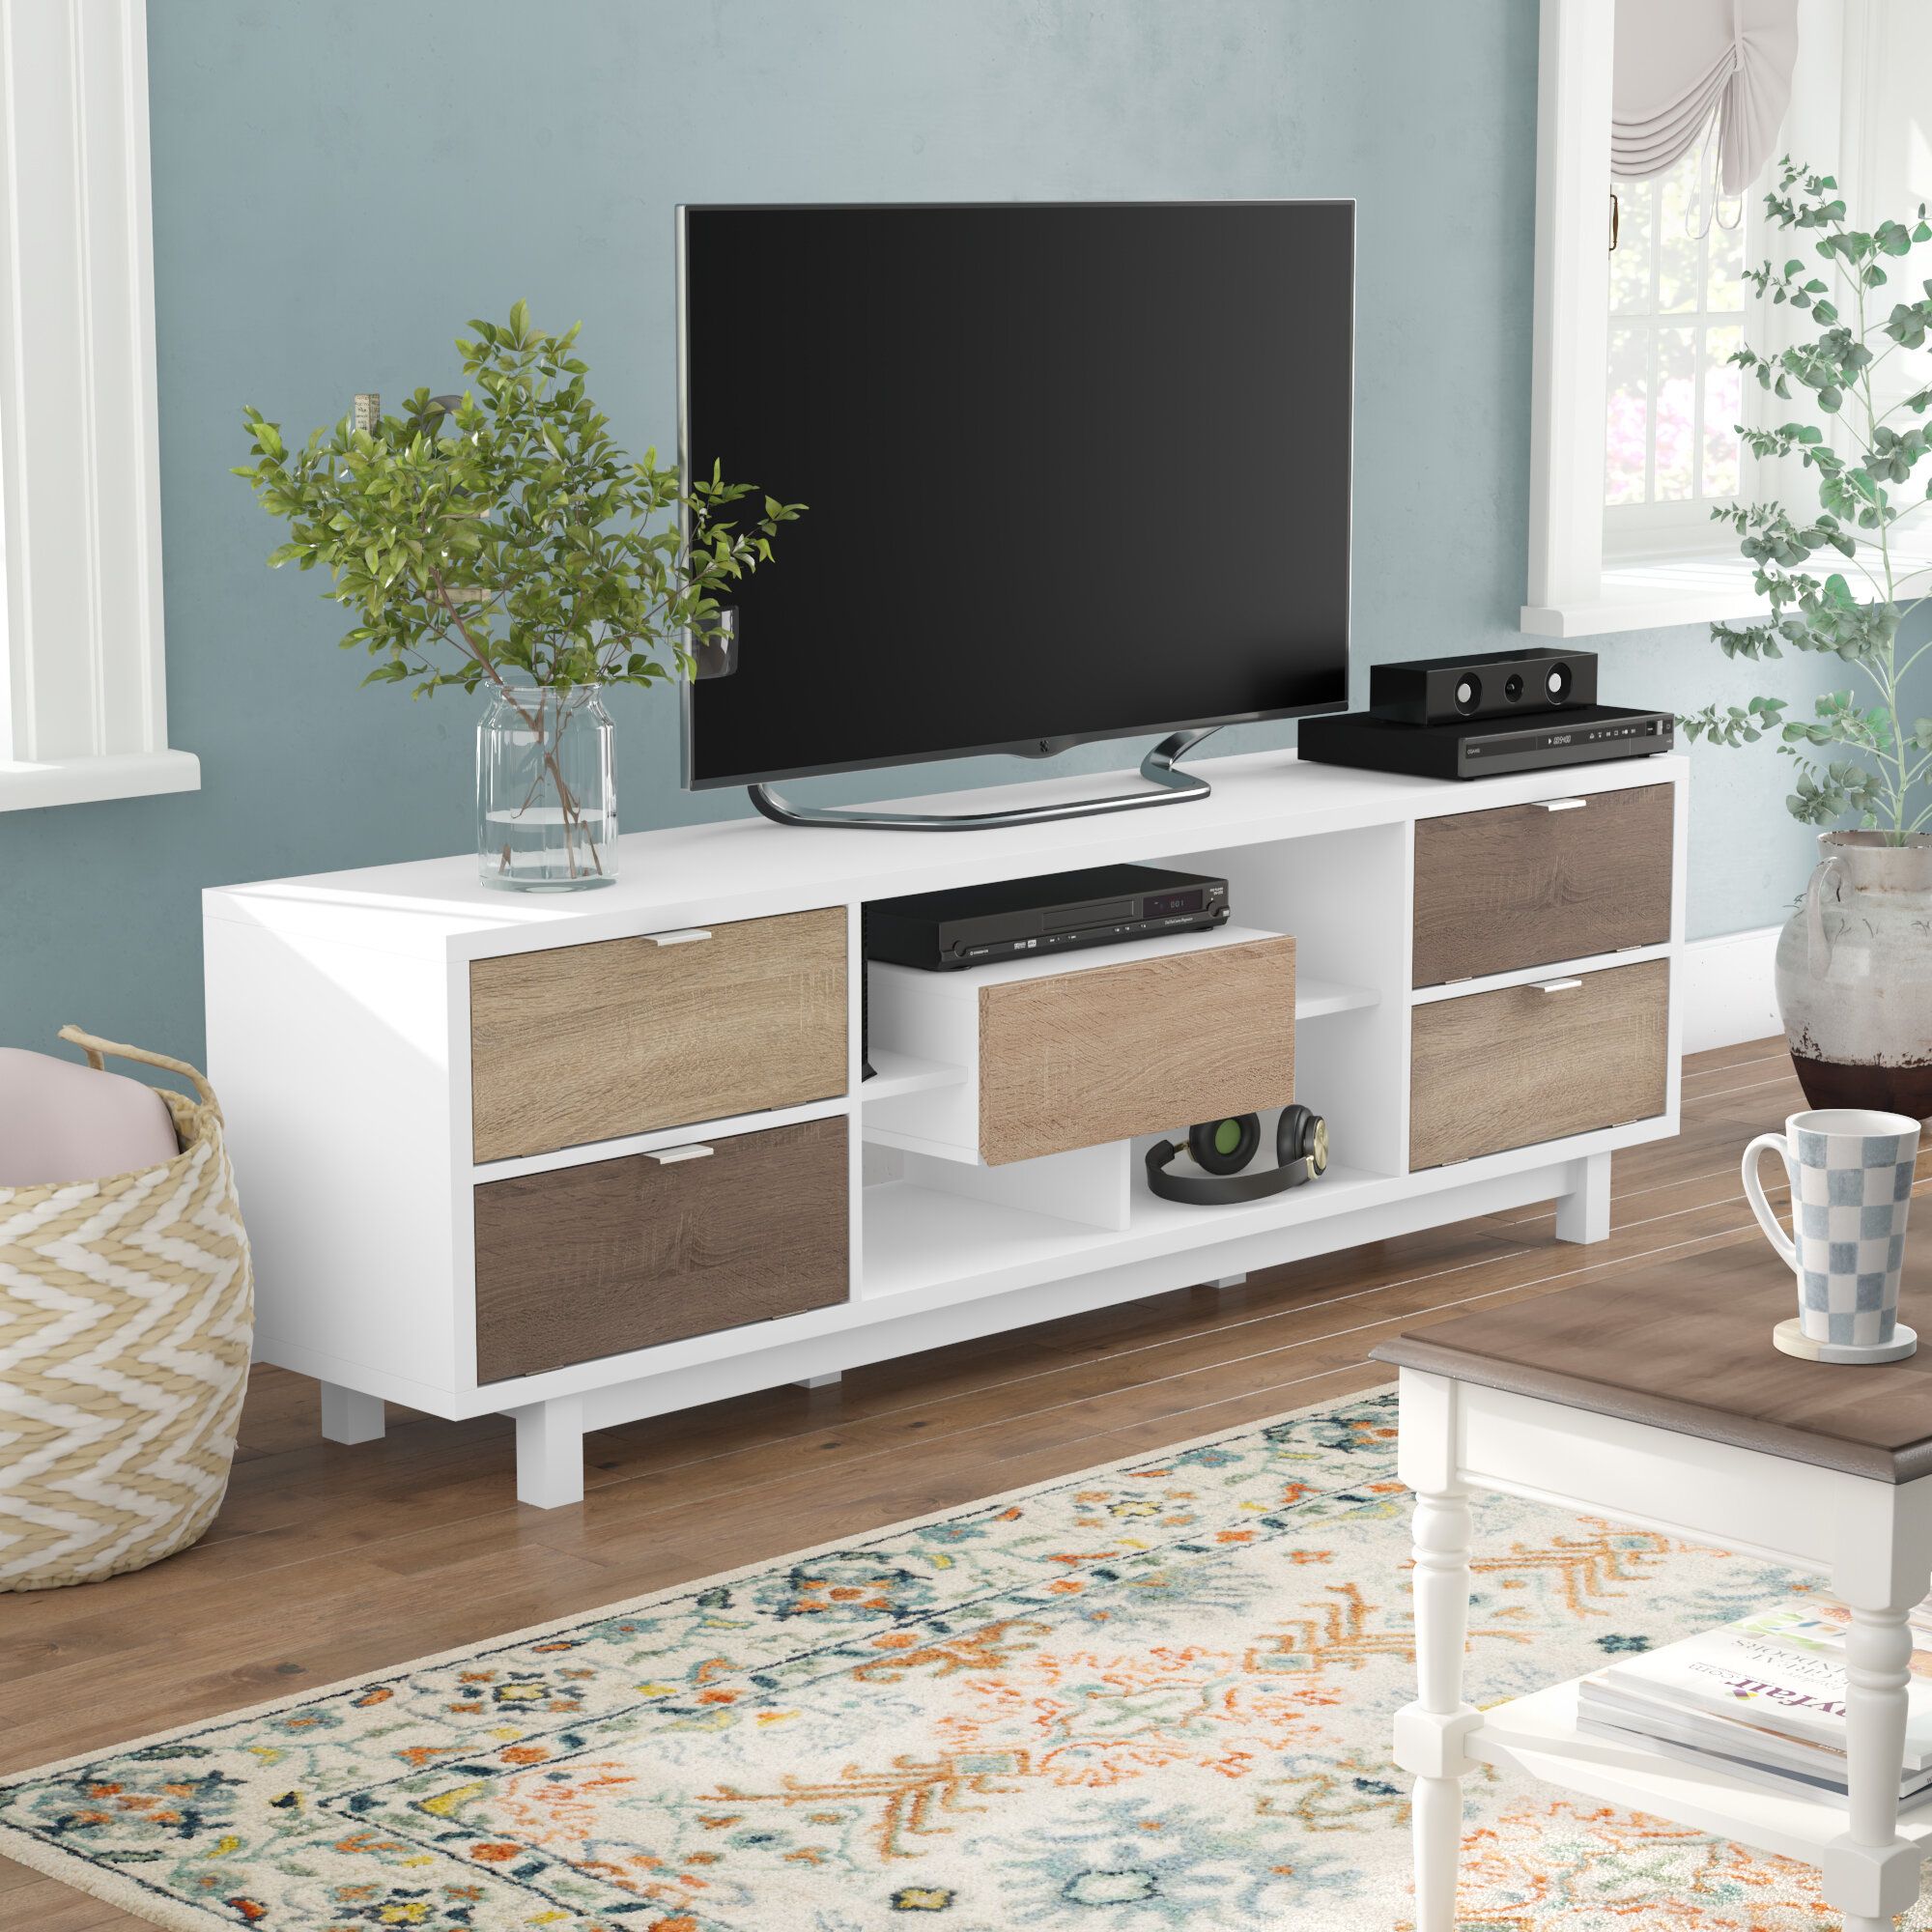 75 Inch Long Tv Stand Table White Modern Living Room Low Regarding Contemporary Tv Cabinets For Flat Screens (View 6 of 15)